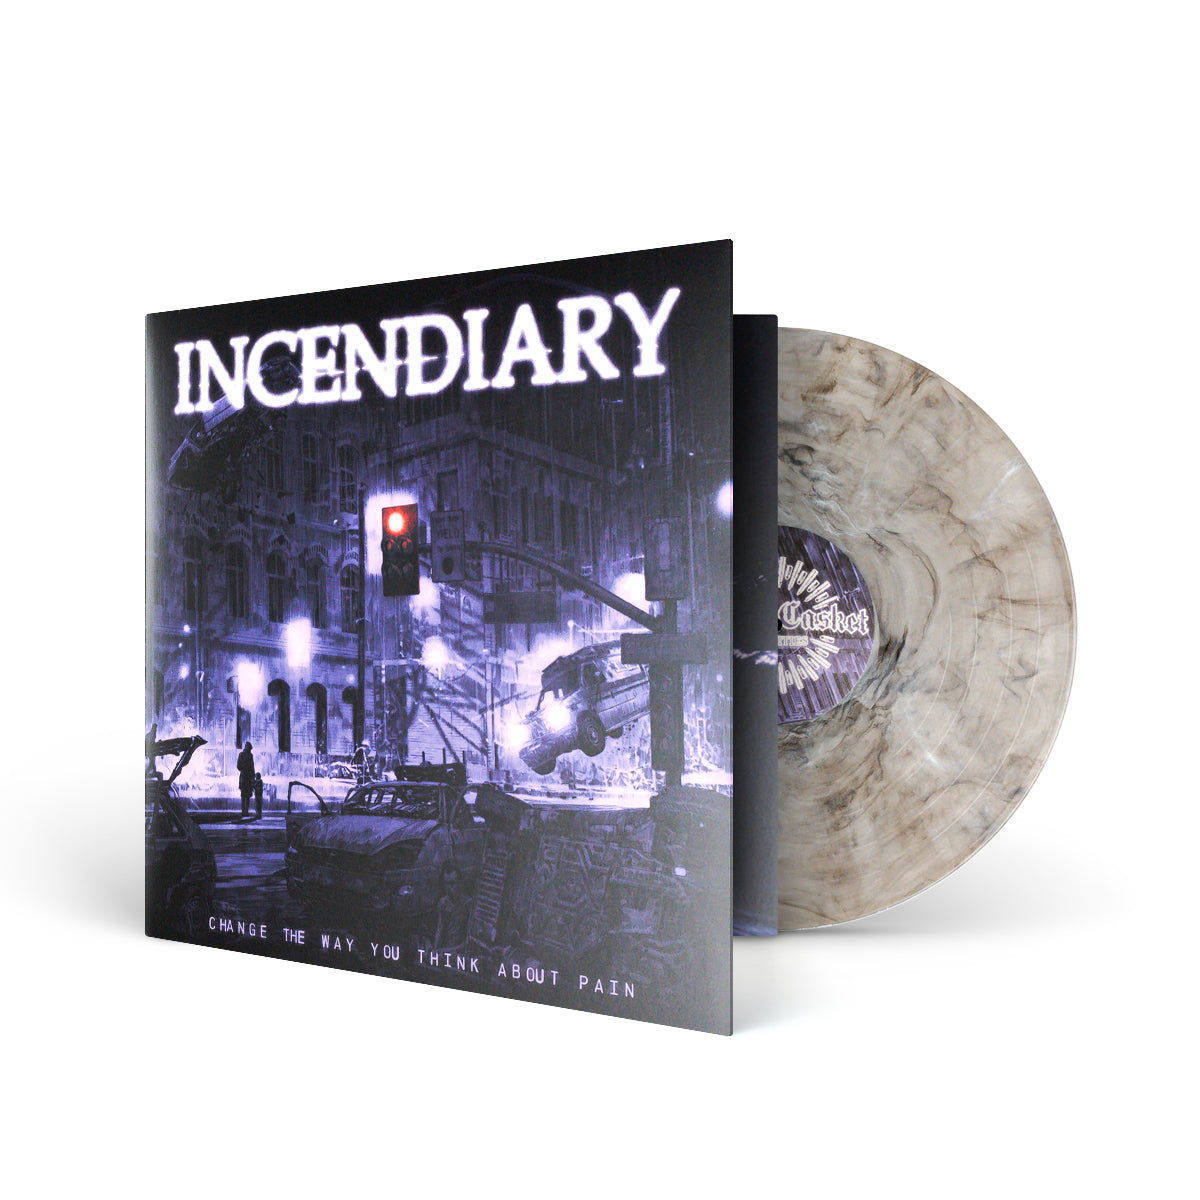 INCENDIARY "Change The Way You Think About Pain" LP